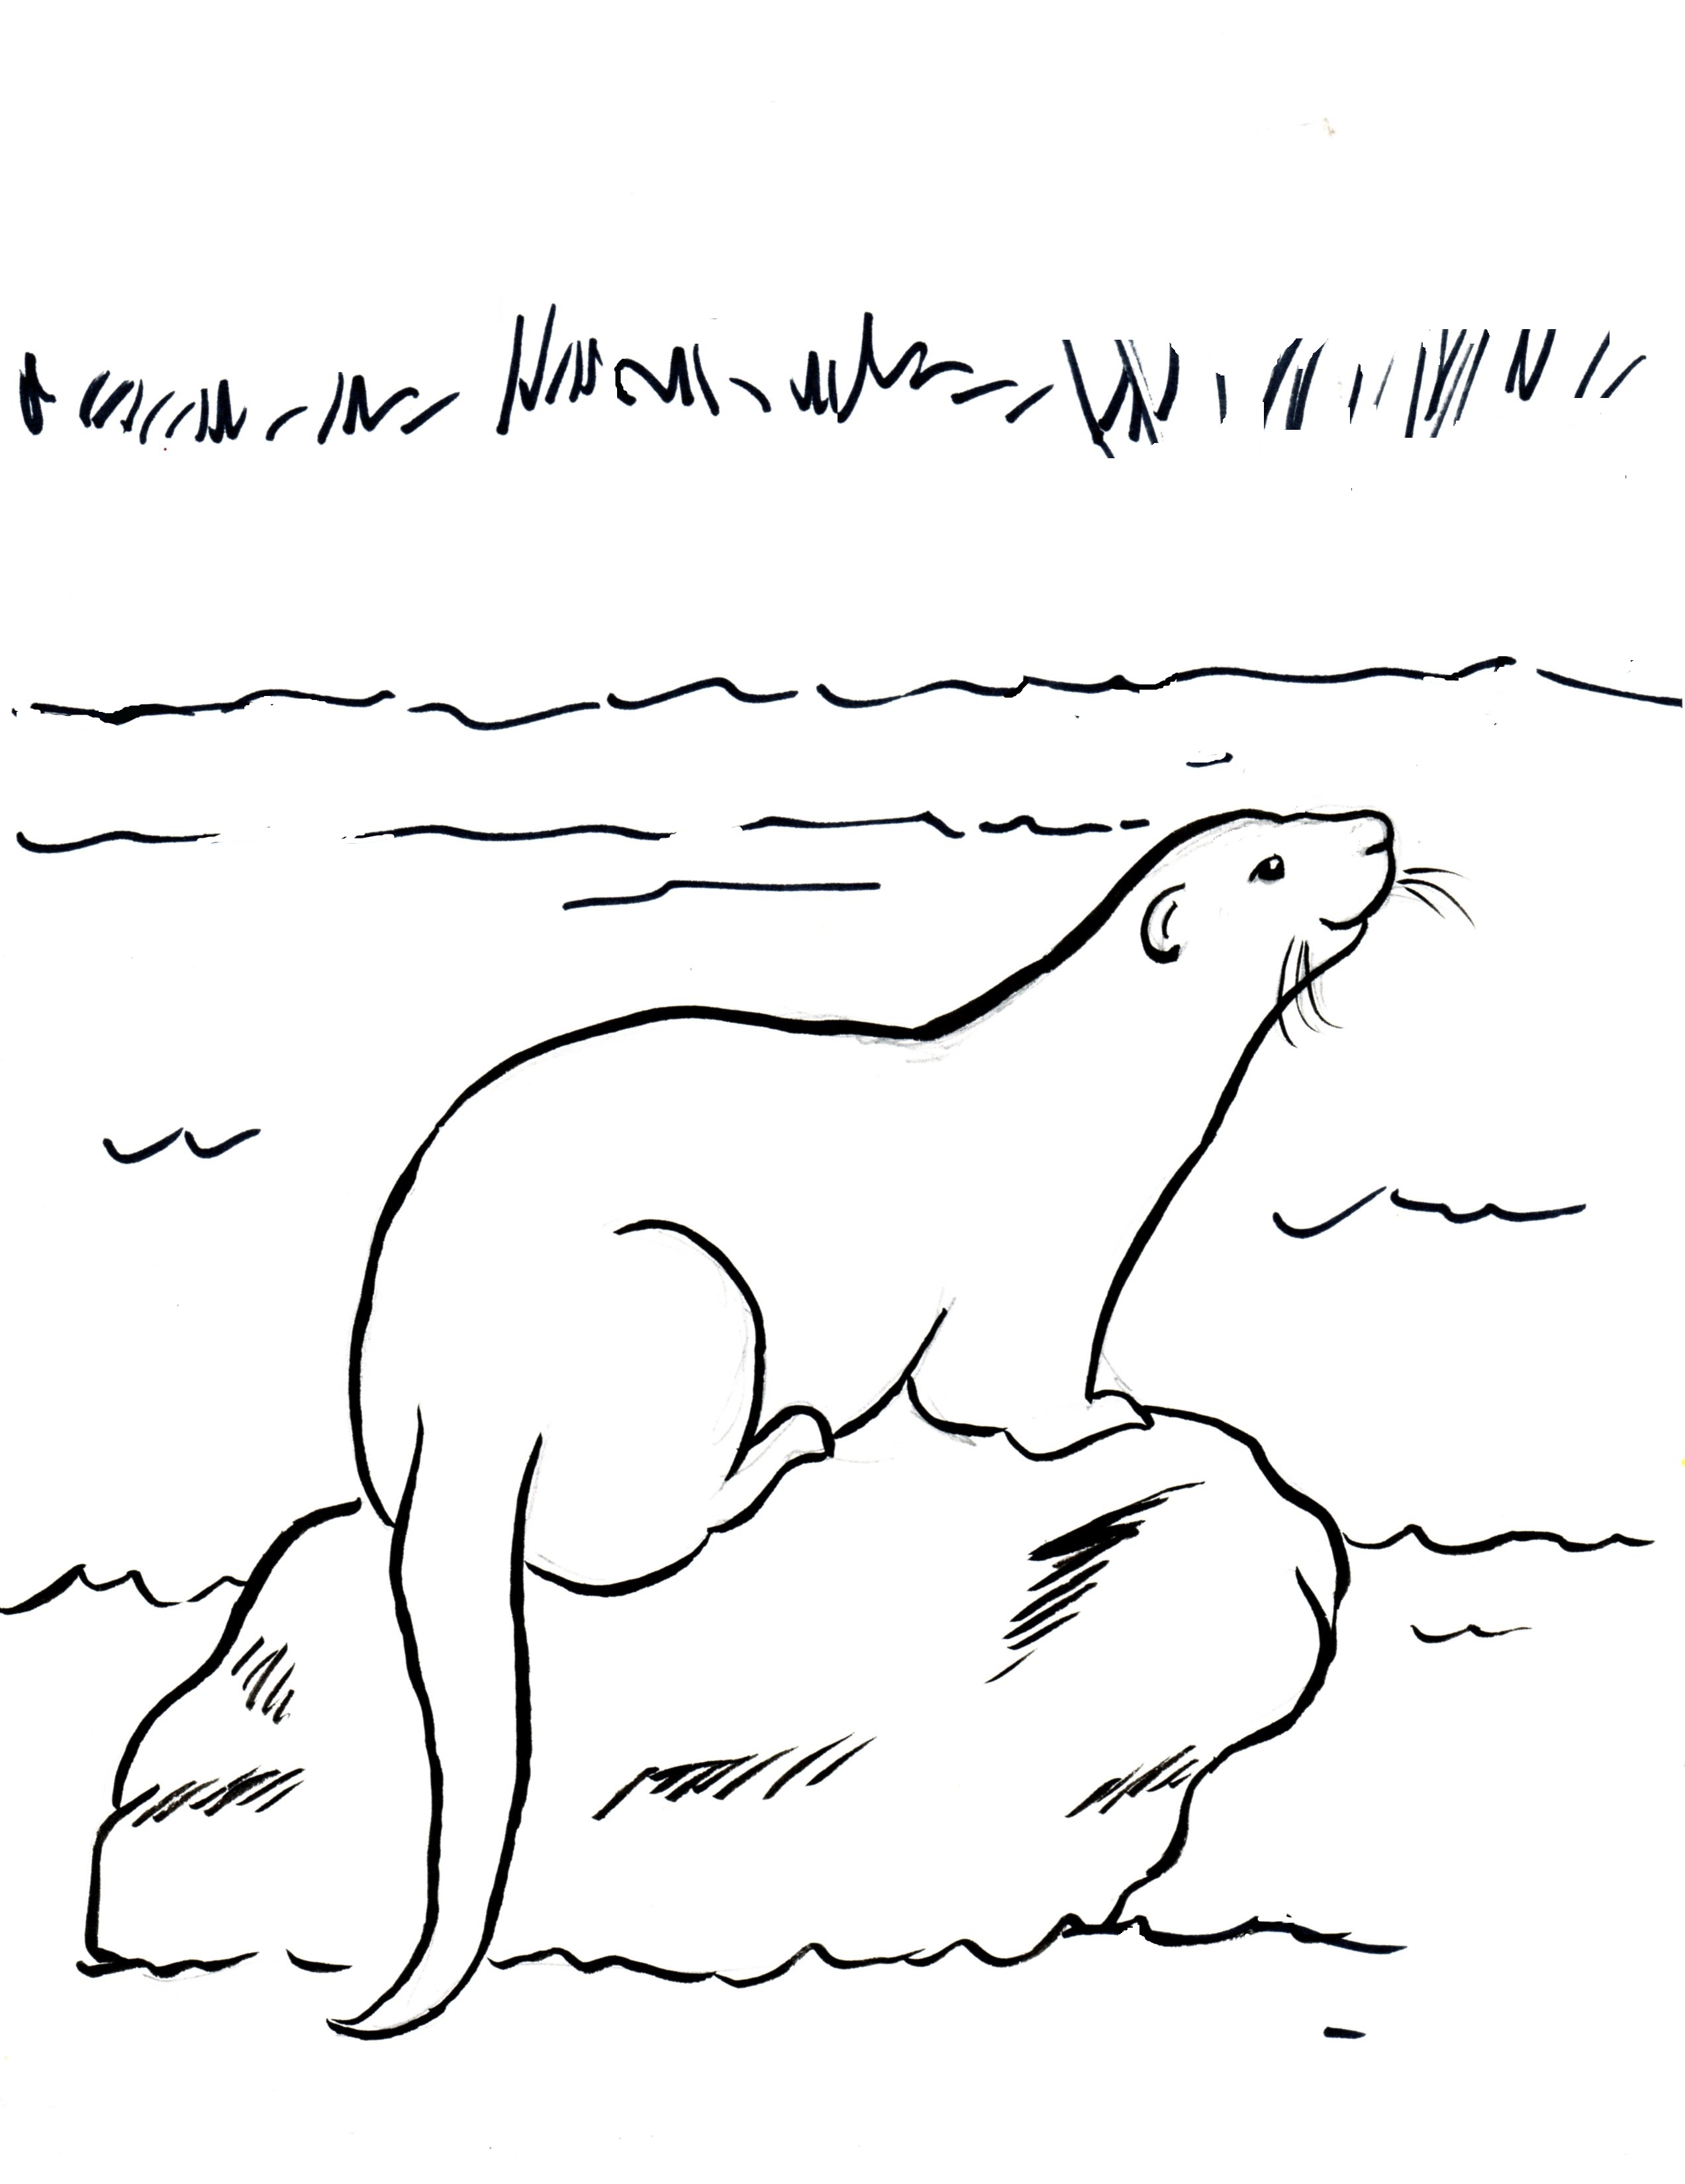 15+ Sea Otter Coloring Page